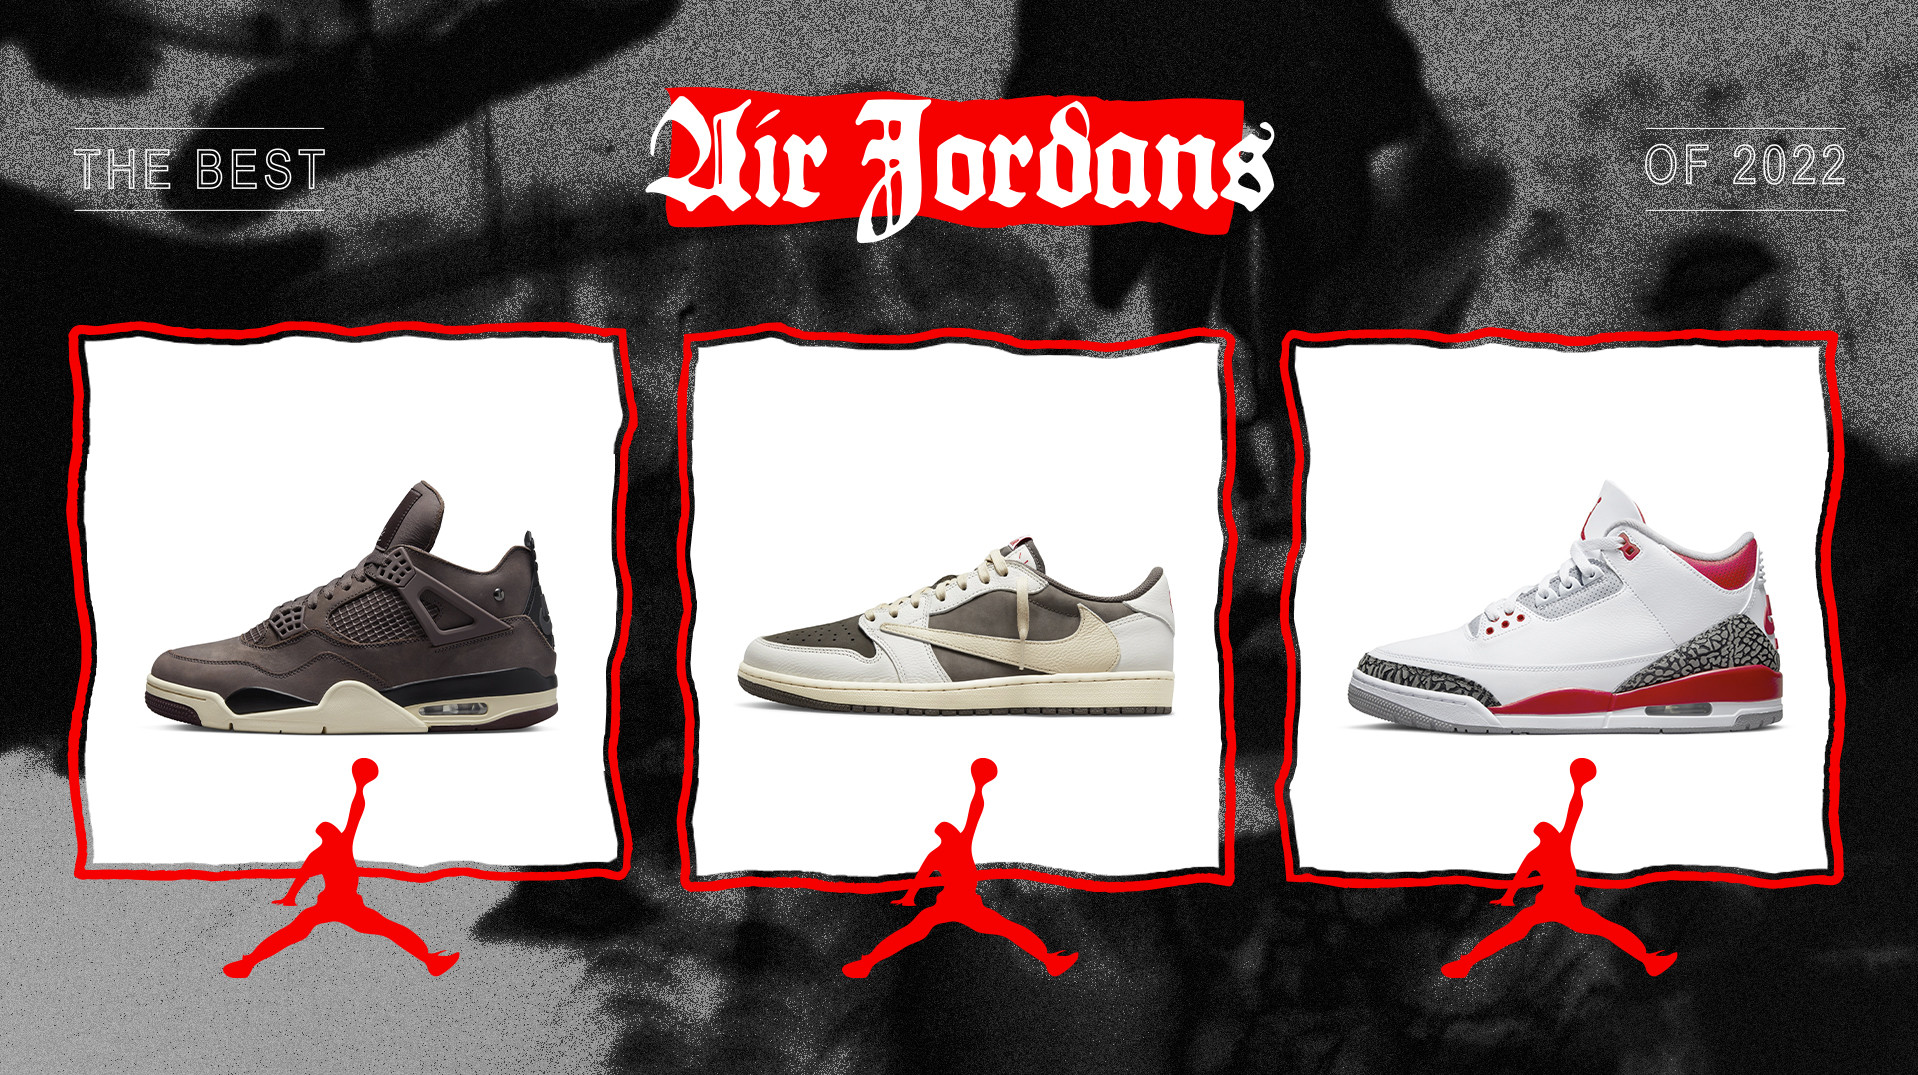 Best Air Jordans Of All Time: Top 5 Nike Designs, According To Sneakerheads  - Study Finds